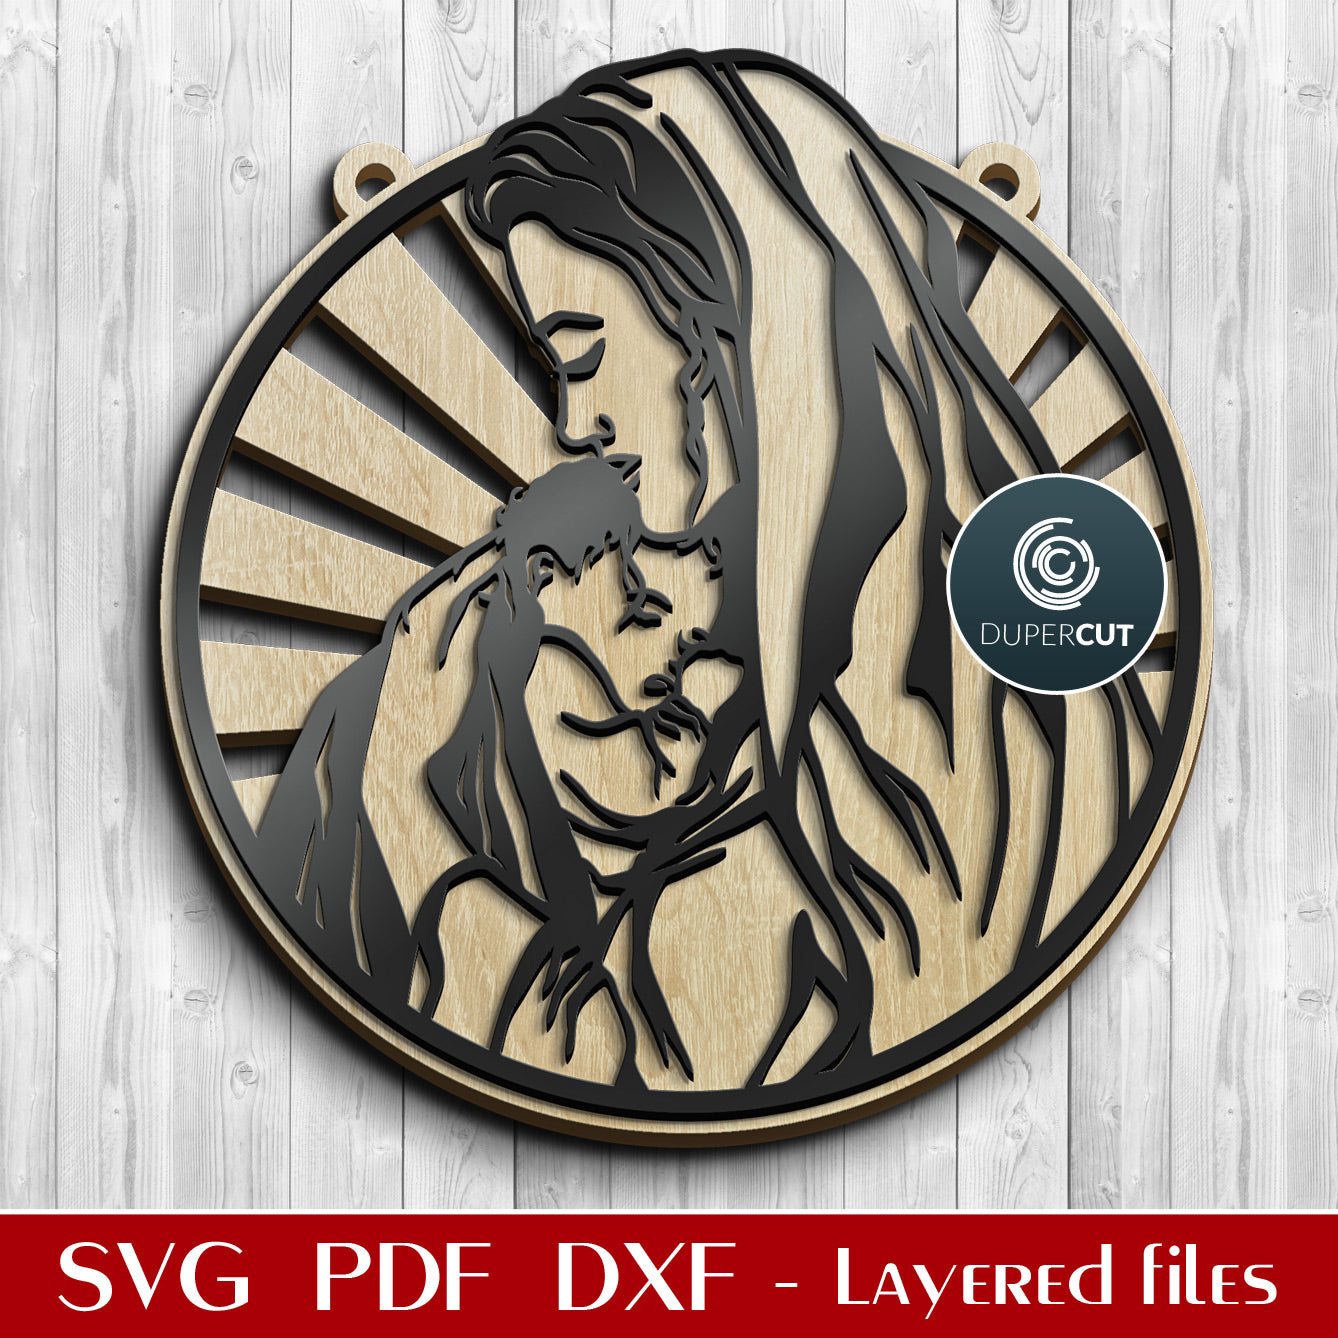 Vrigin Mary with baby Jesus nativity scene DIY door sign decoration - SVG DXF layered cutting files for Glowforge, Cricut, Silhouette, scroll saw pattern by DuperCut